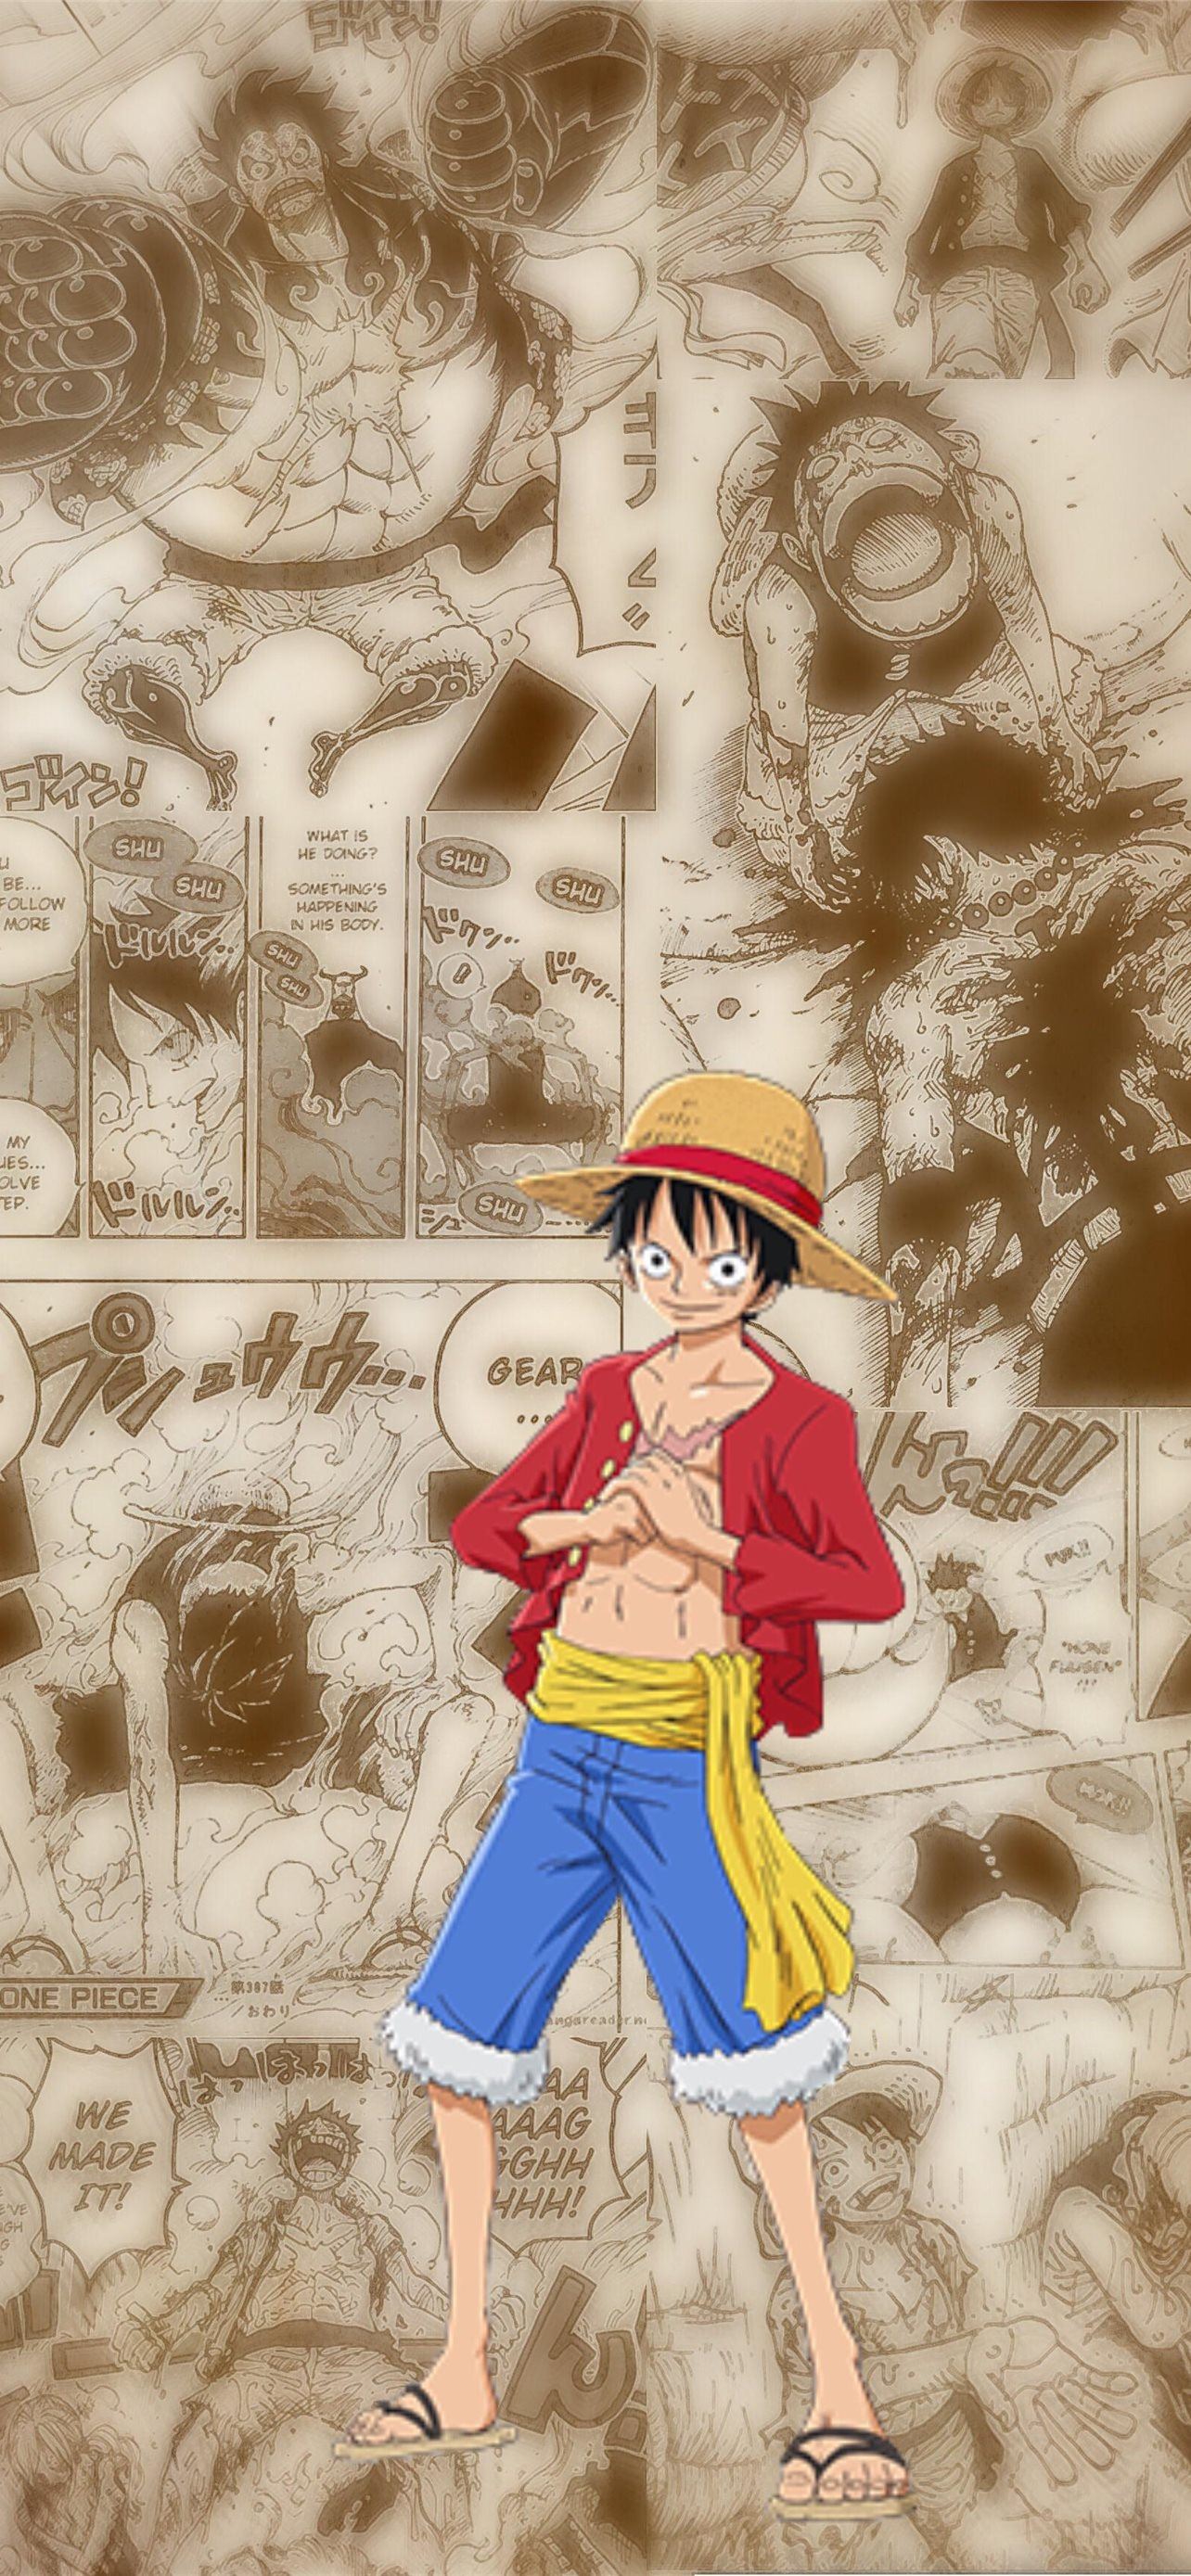 1920x10802021290 Monkey D Luffy One Piece HD Colorful Art 1920x10802021290  Resolution Wallpaper HD Anime 4K Wallpapers Images Photos and Background   Wallpapers Den